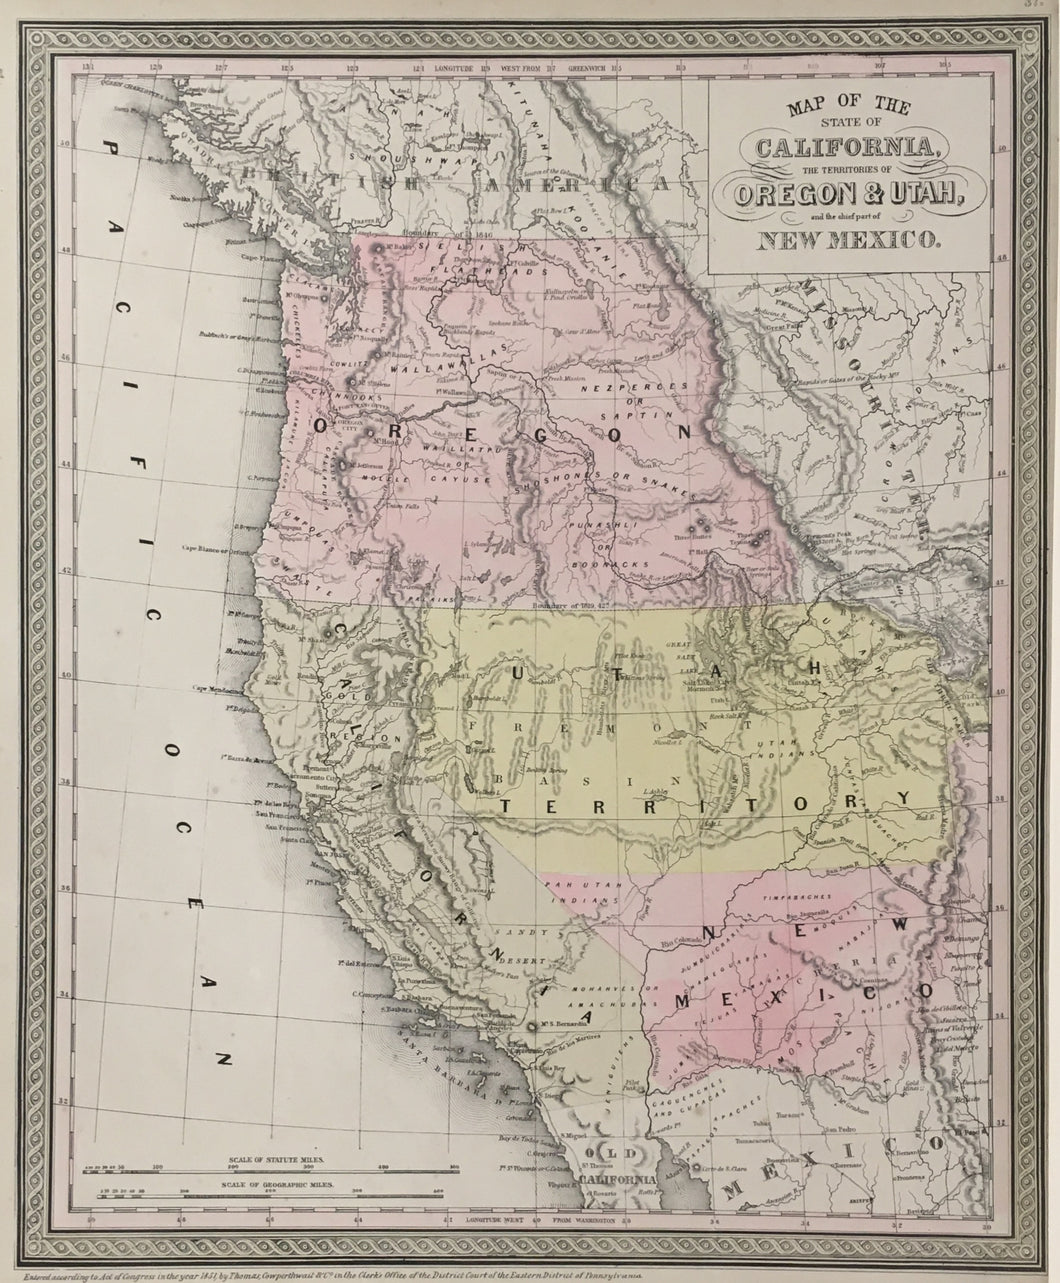 Mitchell, S. Augustus “Map of the State of California, The Territories of Oregon & Utah, and the chief part of New Mexico